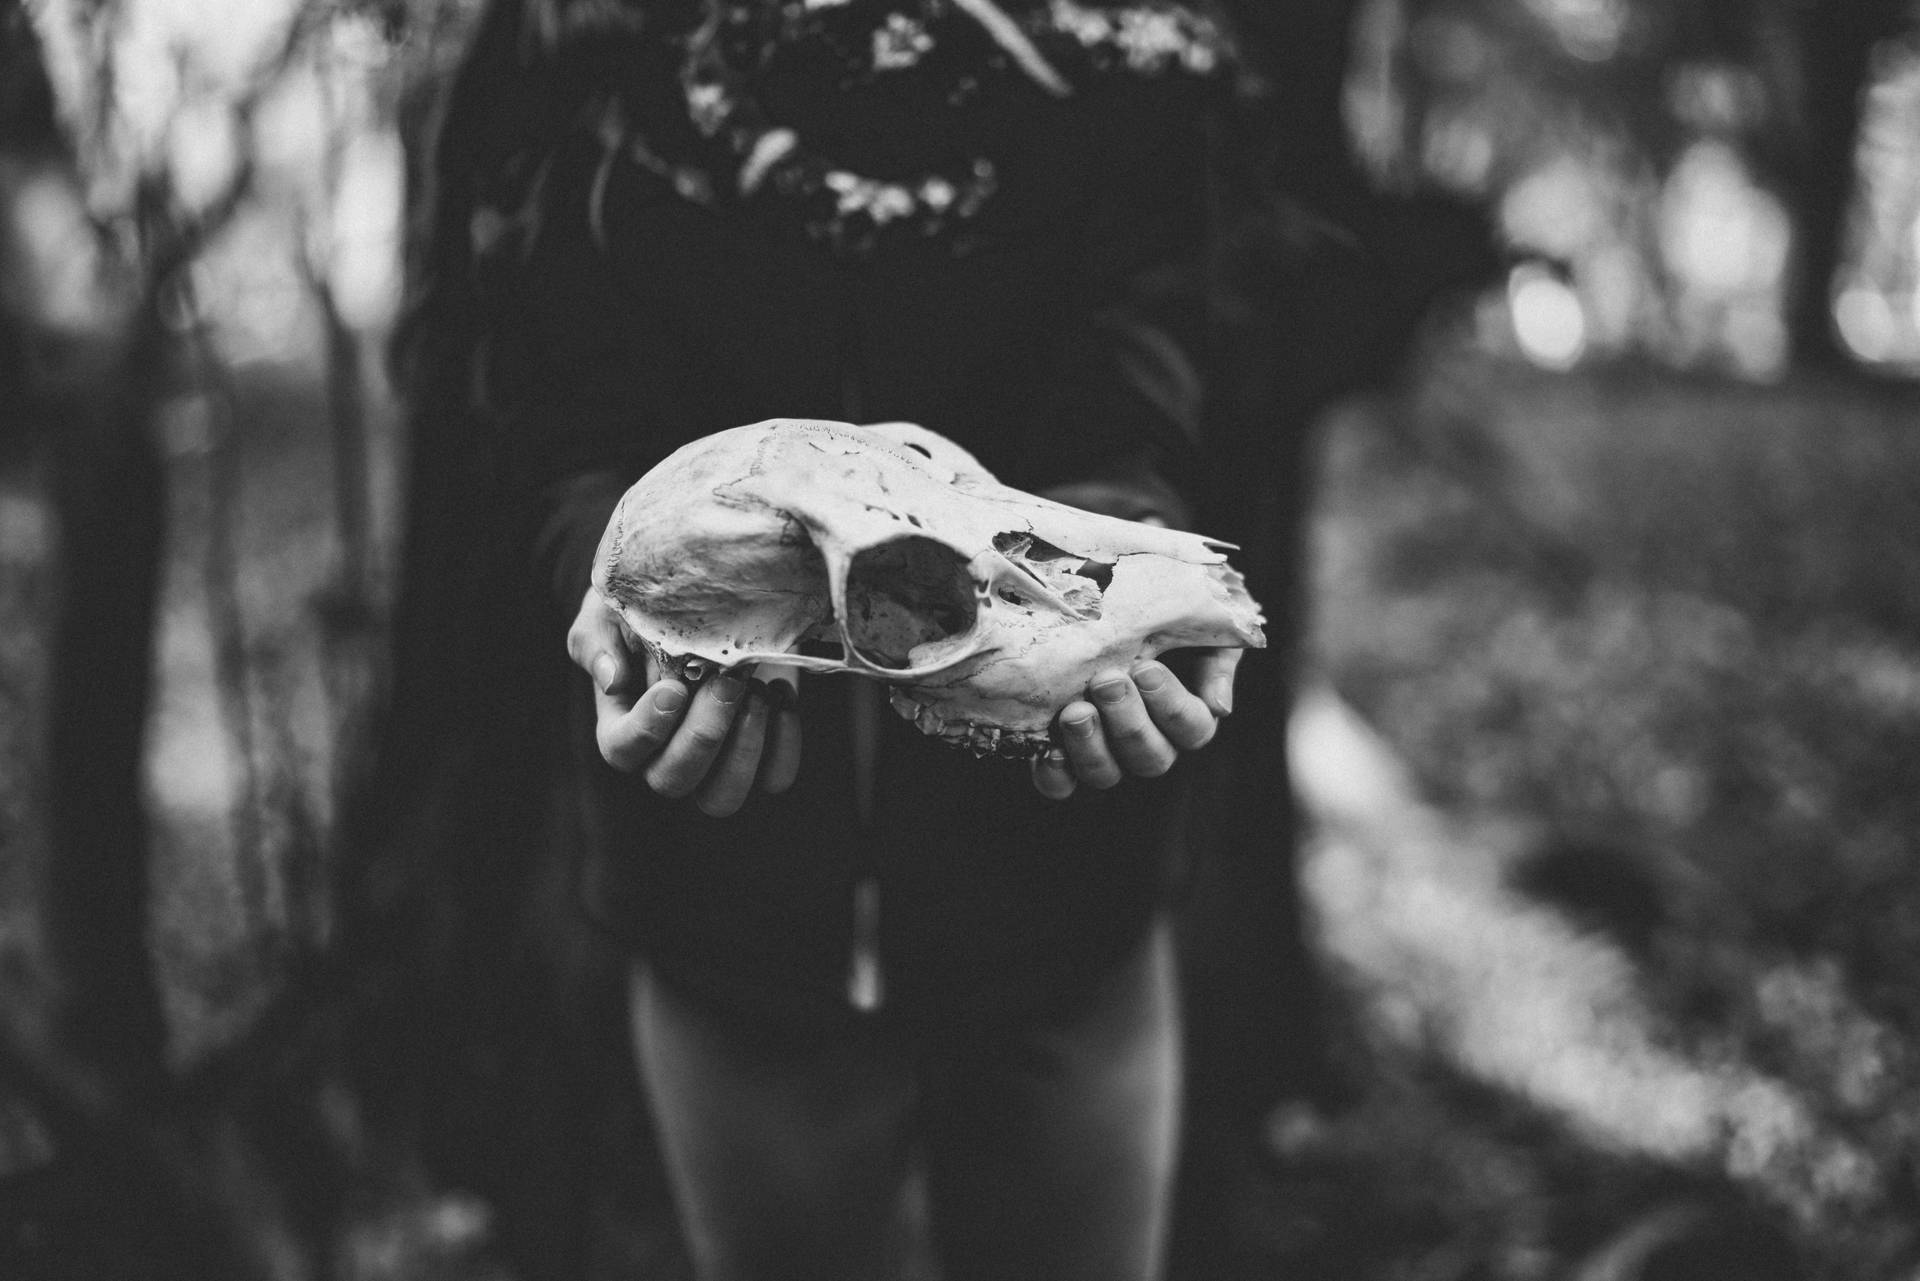 Scary Skulls Of Animal Held By Child Background